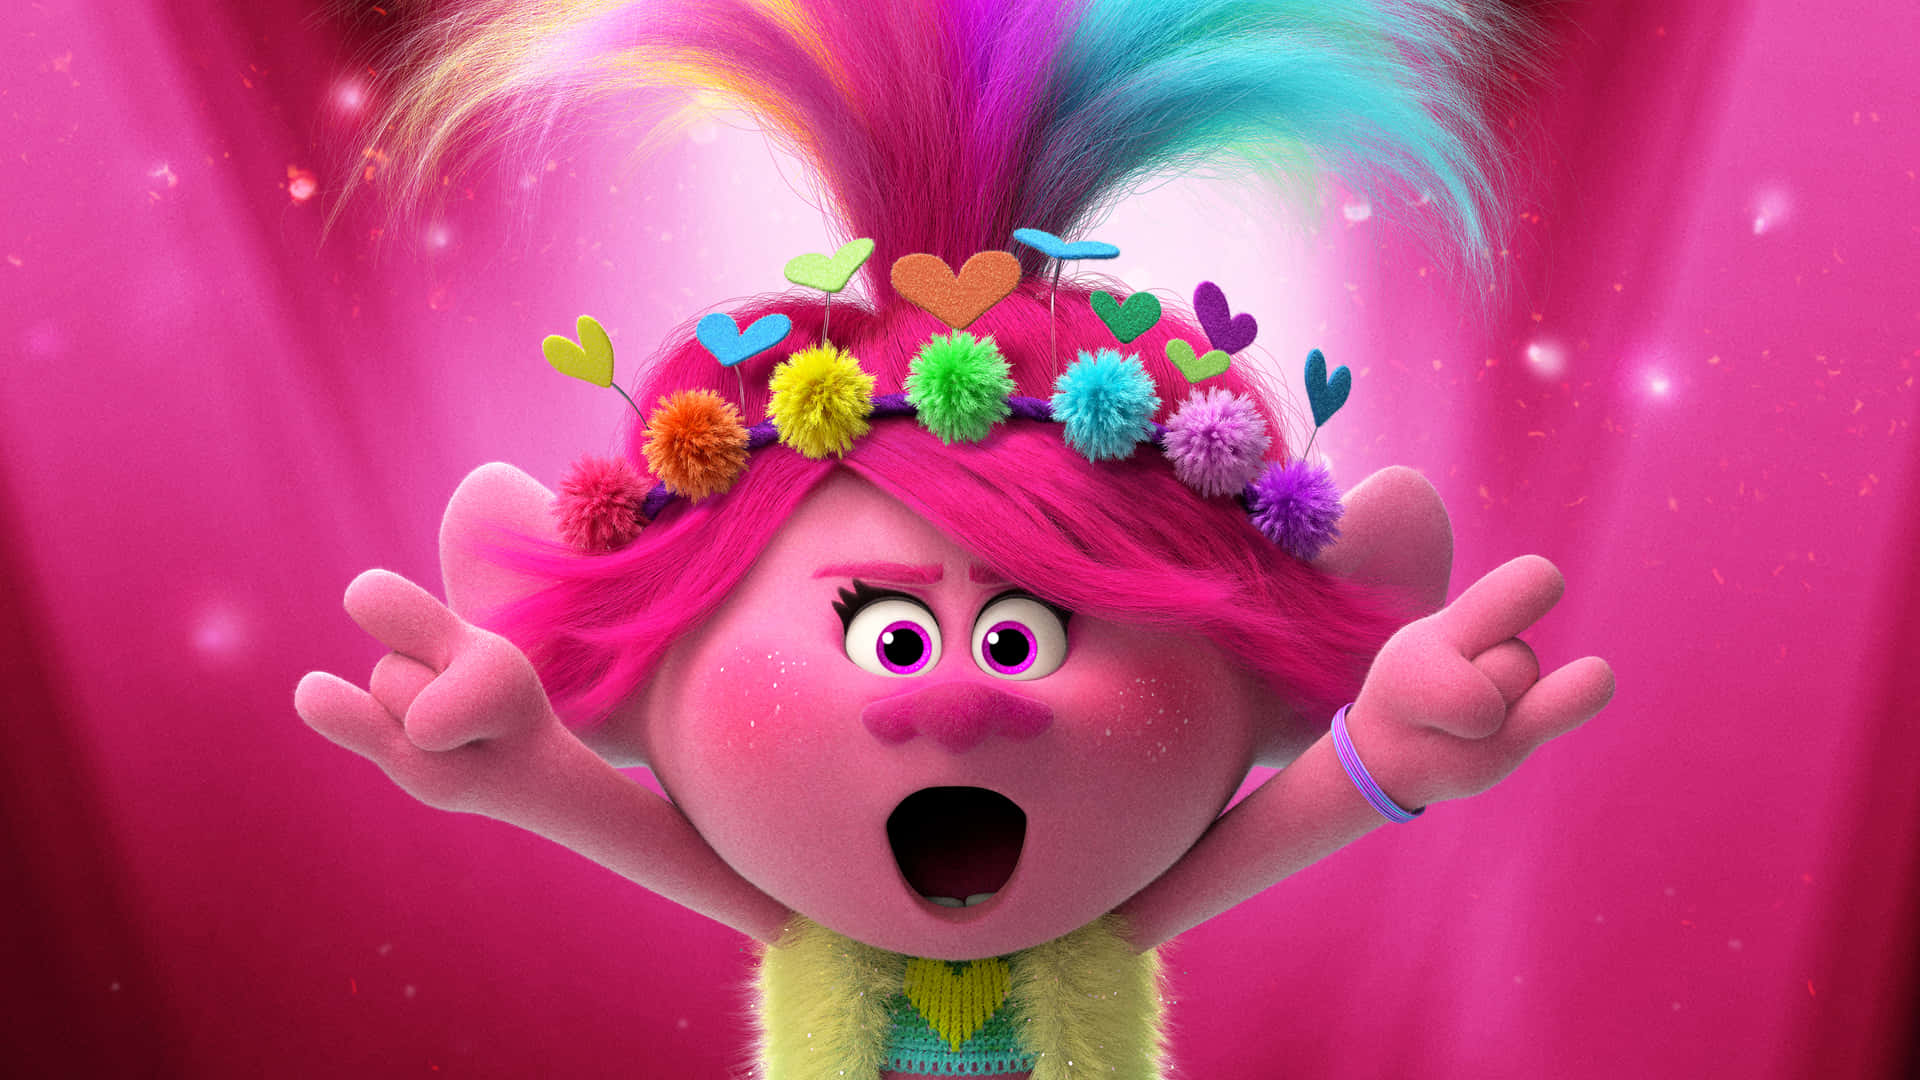 Branch discovers Queen Poppy's newest mission in Trolls World Tour Wallpaper